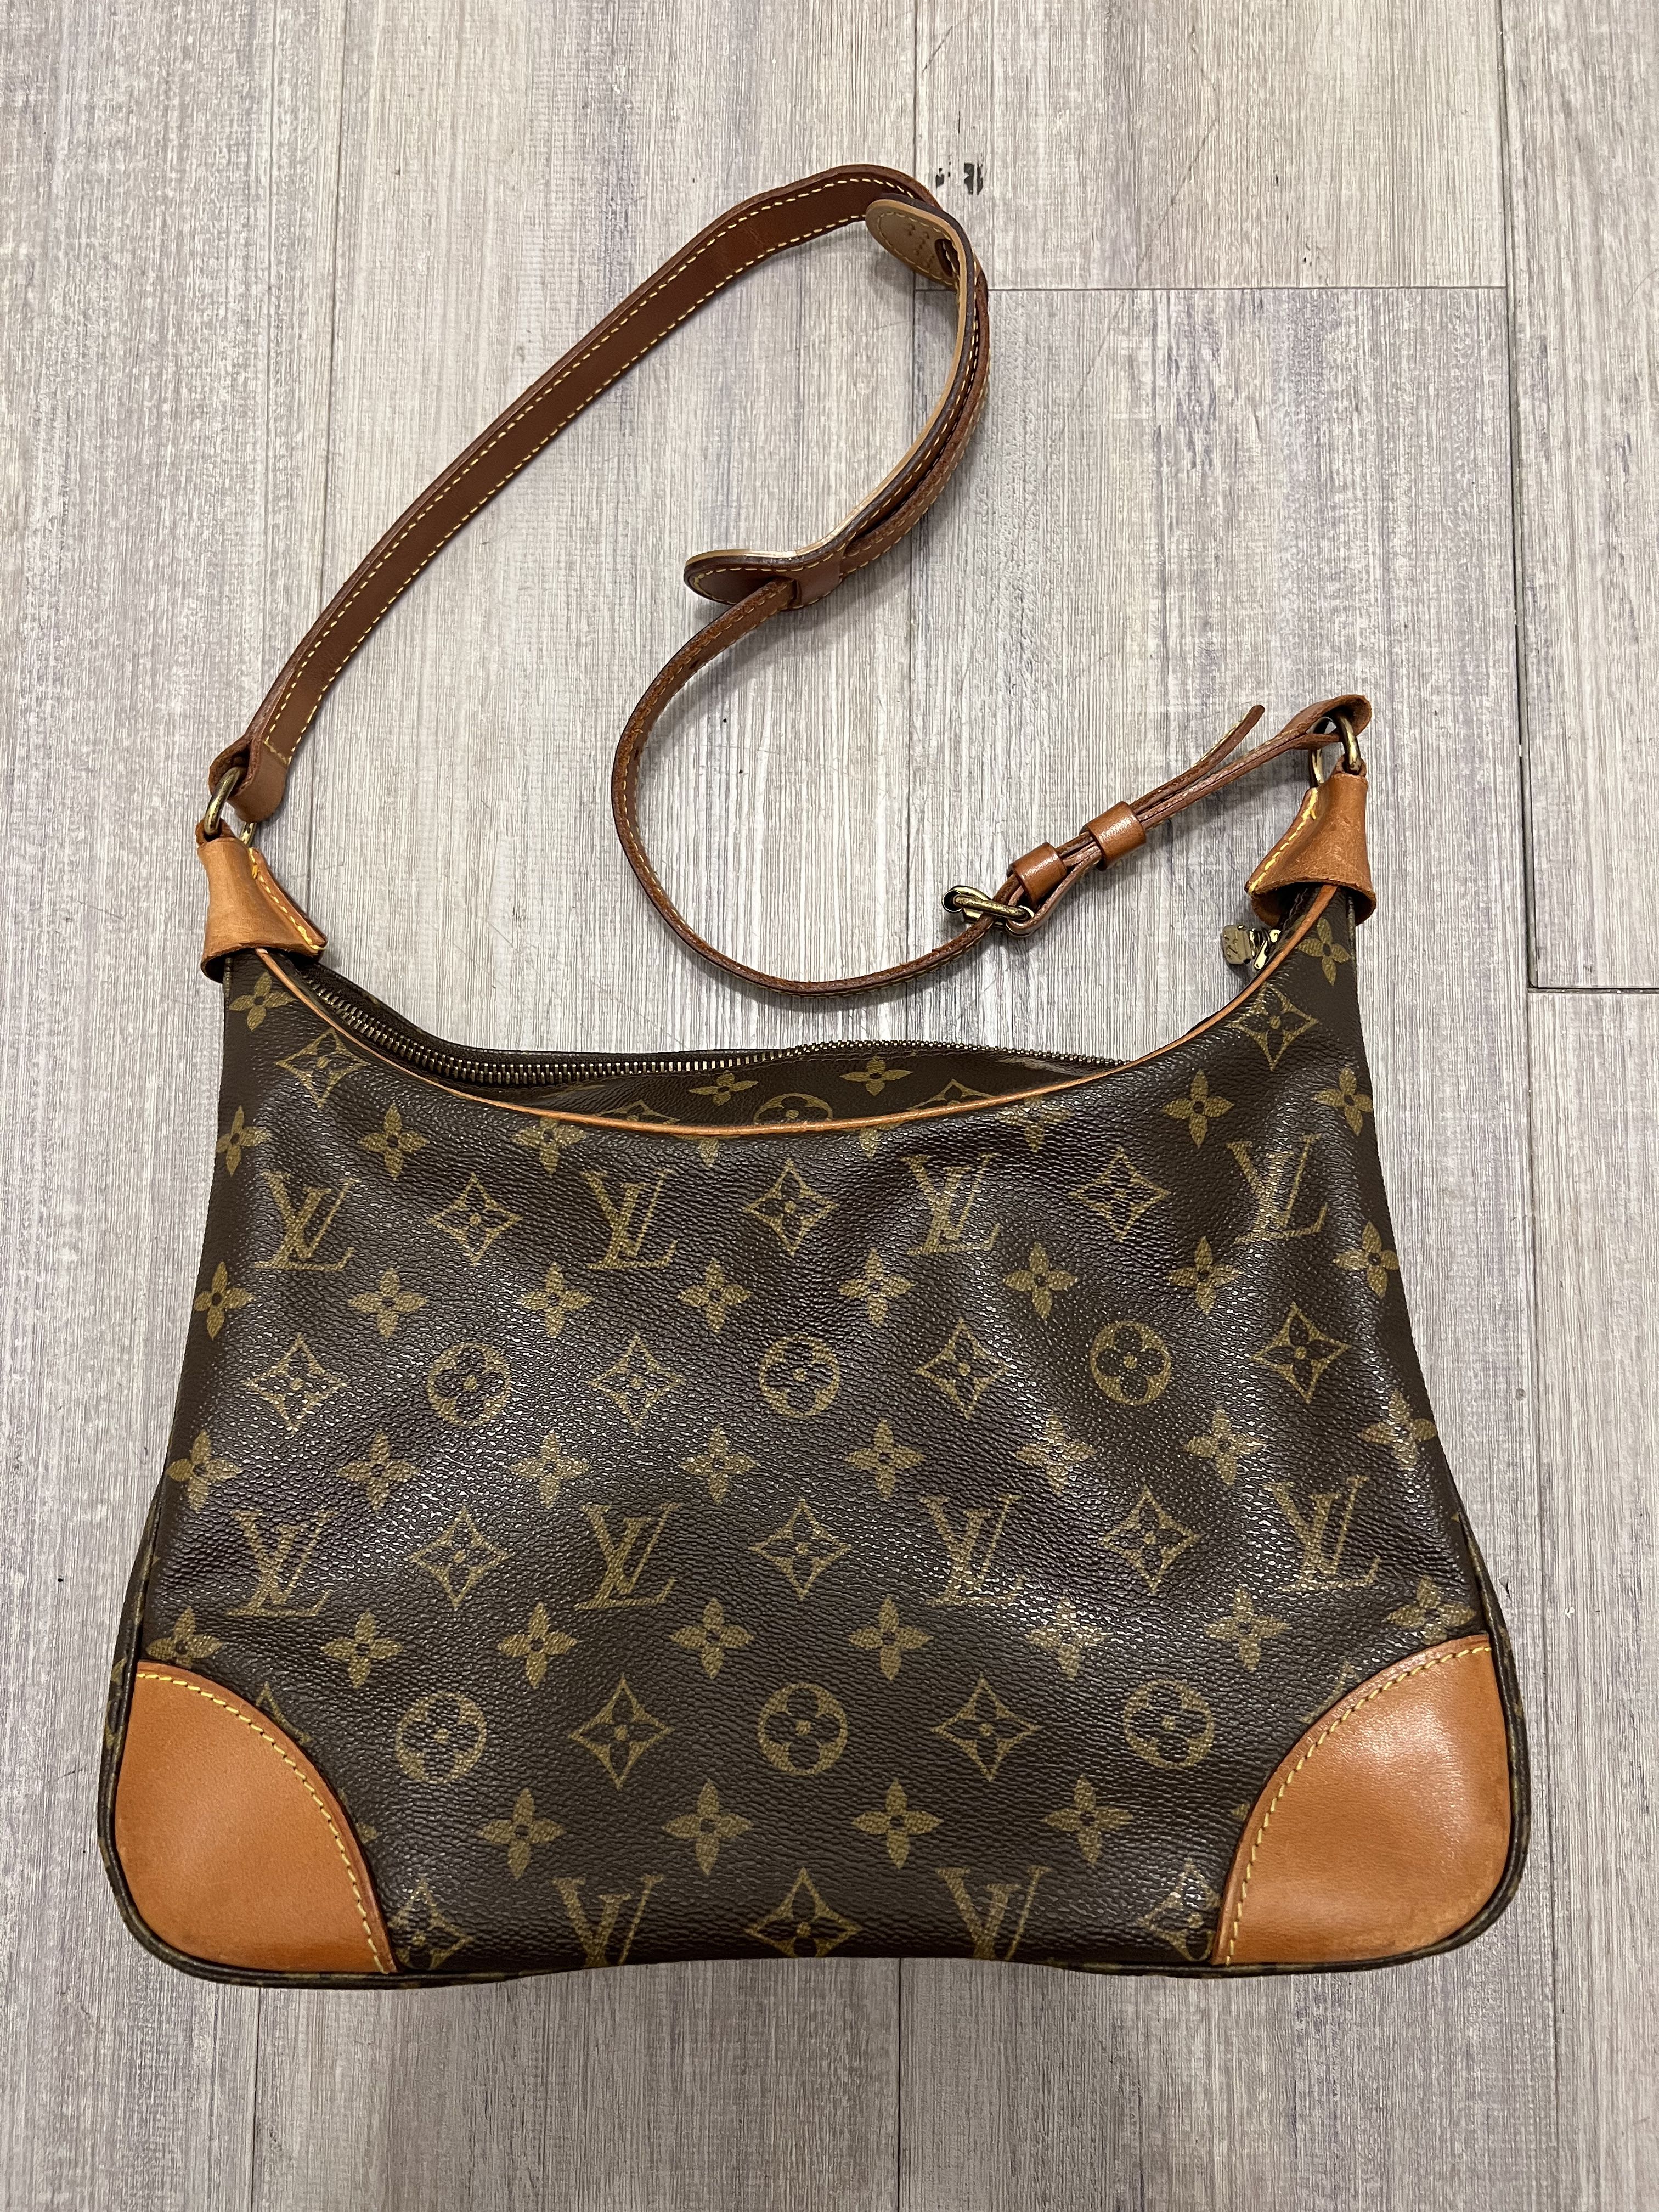 LOUIS VUITTON BOULOGNE 1 Year Wear & Tear Review + What I